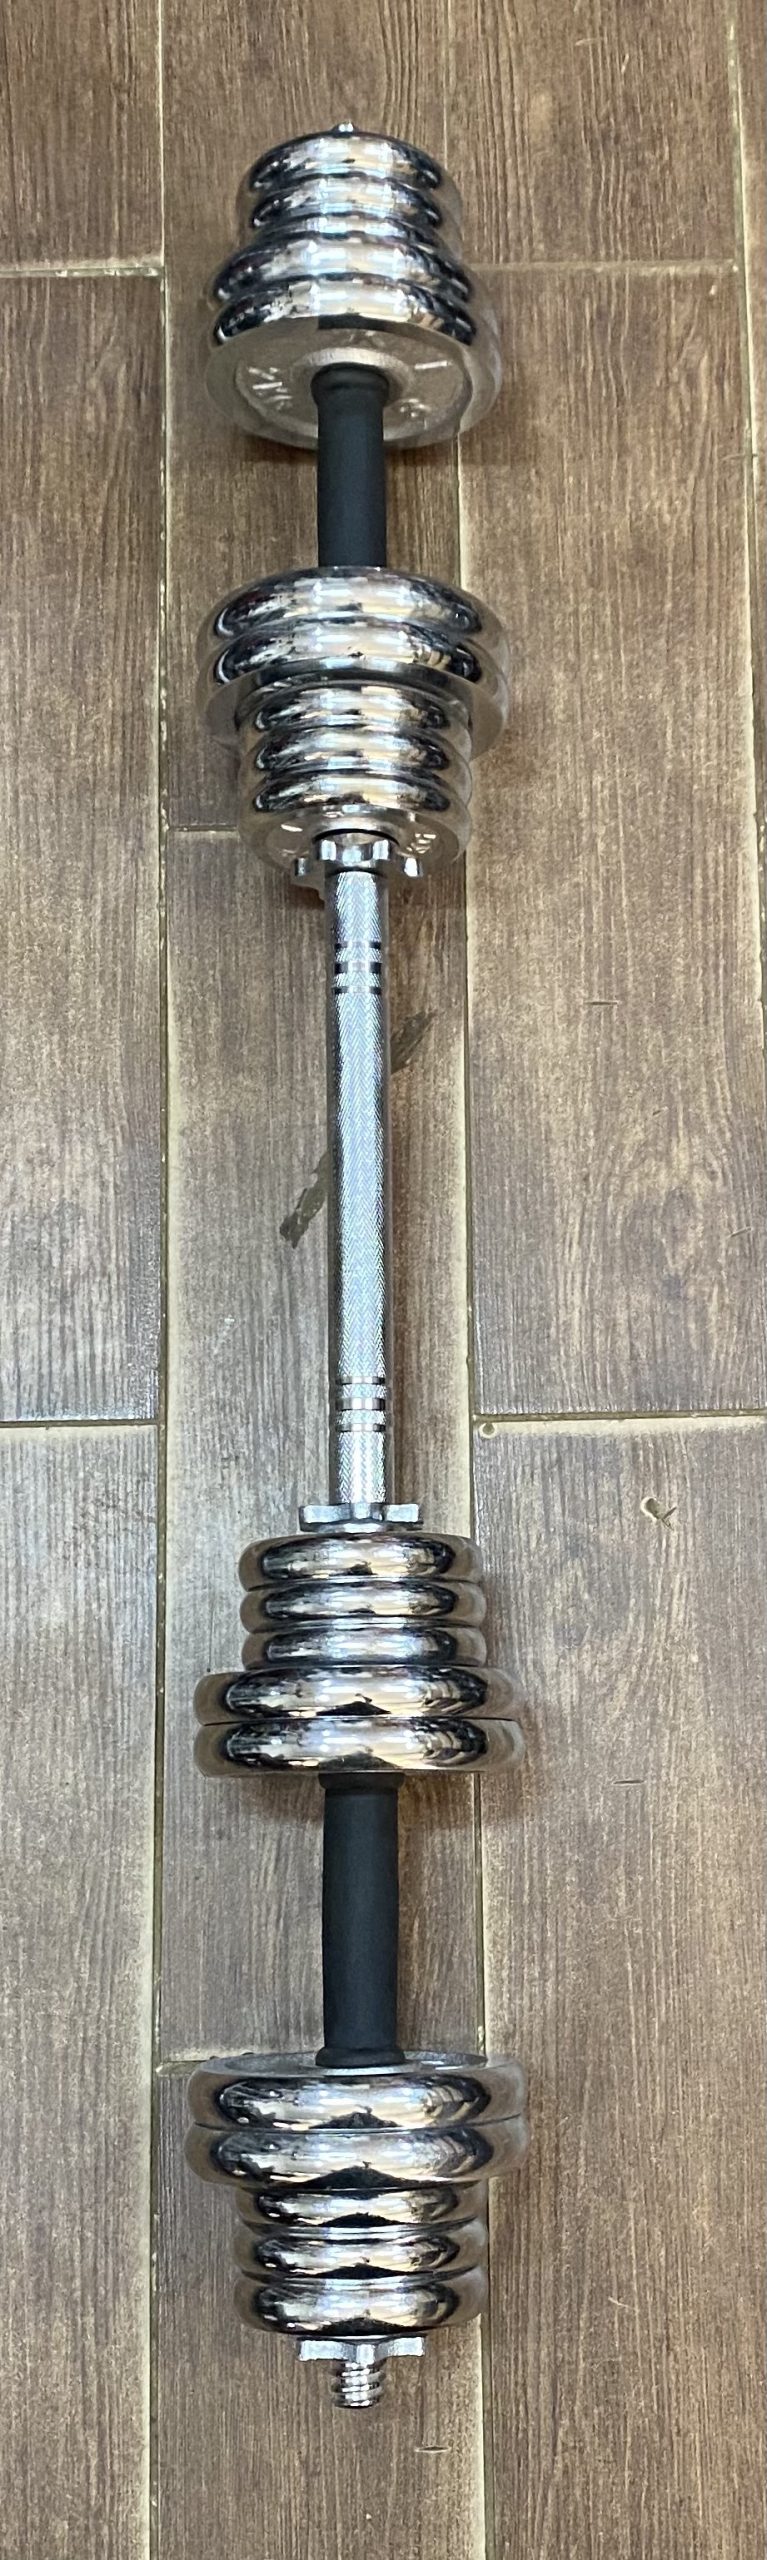 20kg barbell 75cm with connector